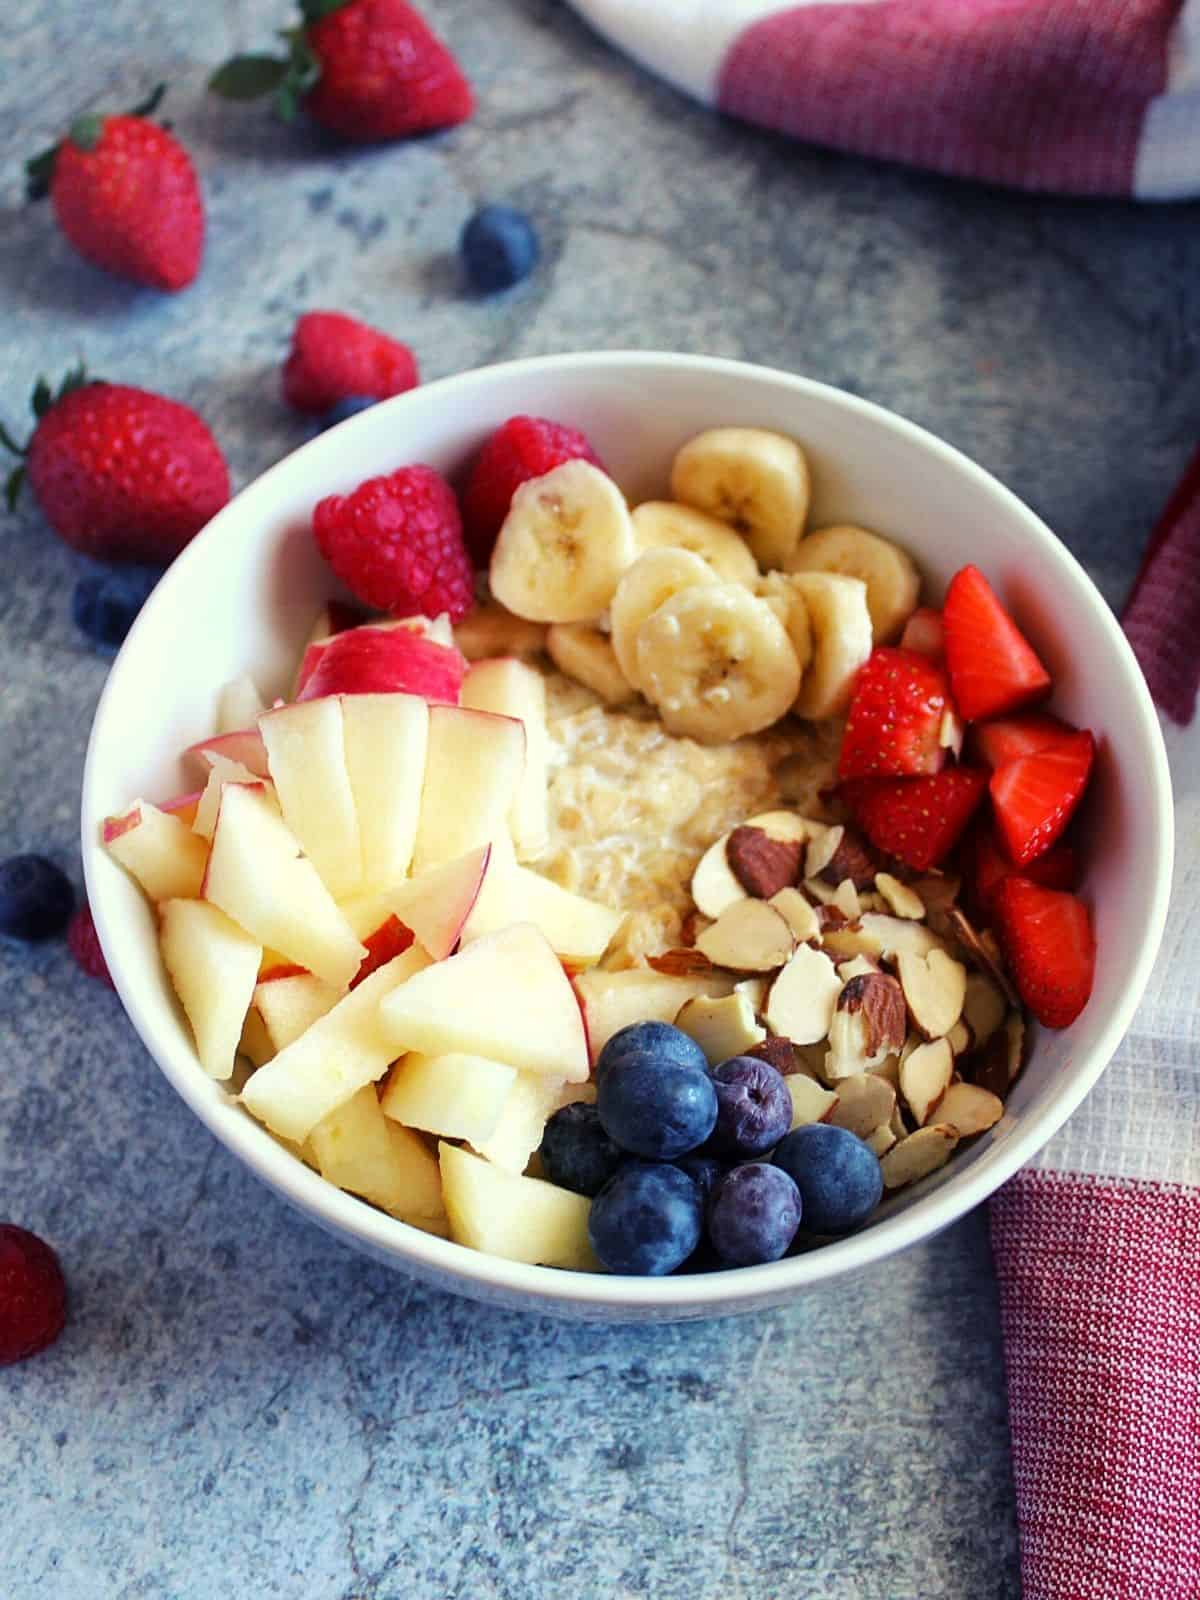 cooked rolled oats served in a bowl with chopped banana, apple, strawberries, blueberries, almonds topping